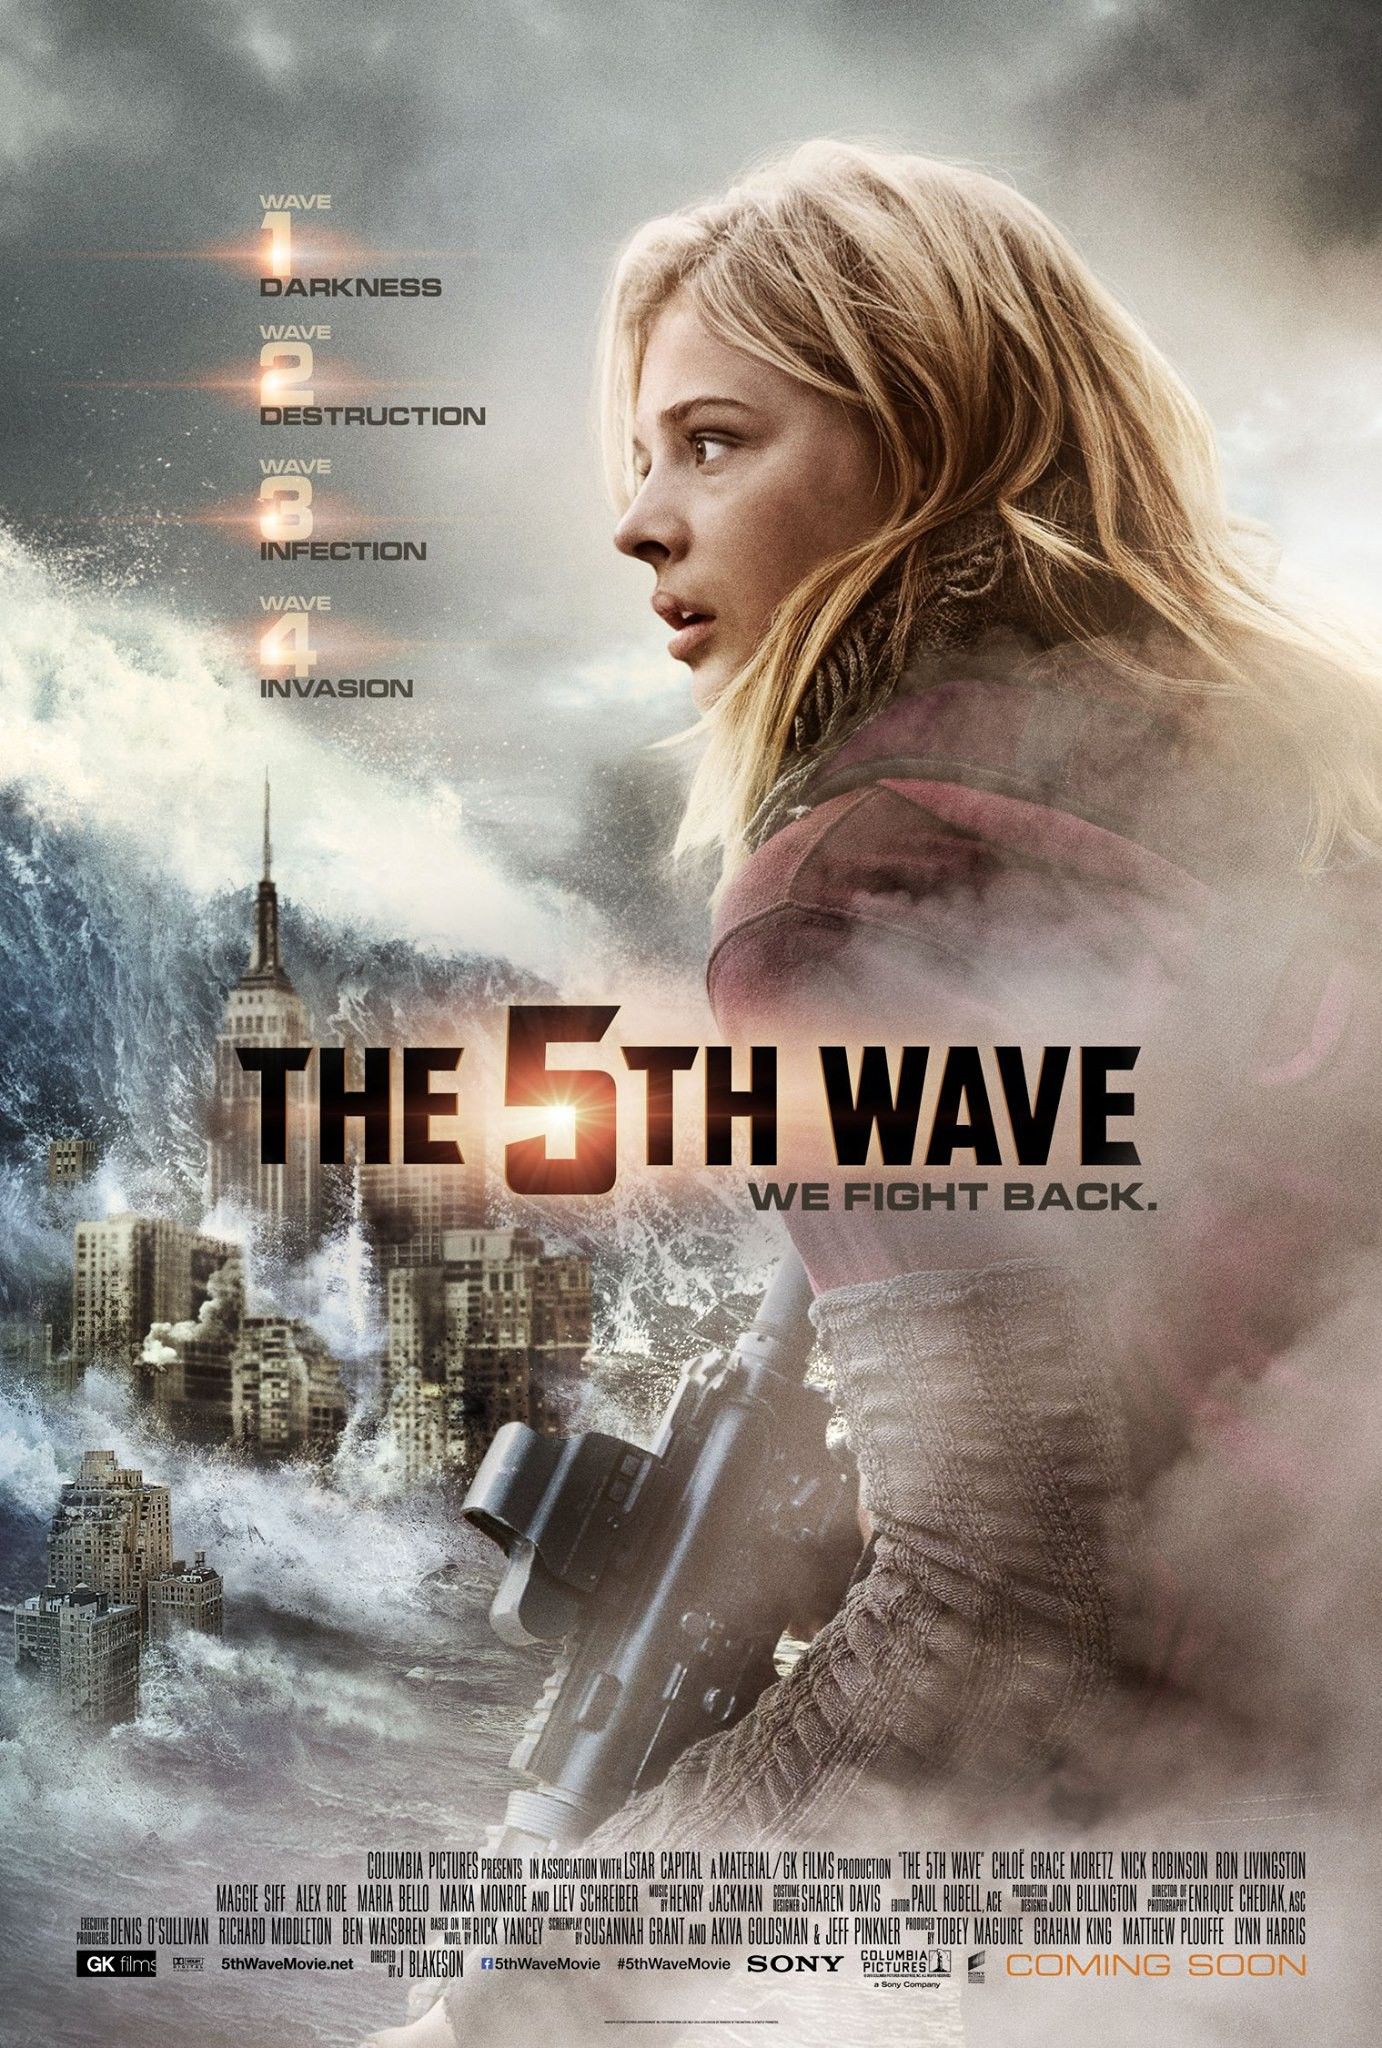 The 5th Wave Upcoming Movies. Movie Database. JoBlo.com, Release Date Latest Picture, Posters, Videos and News